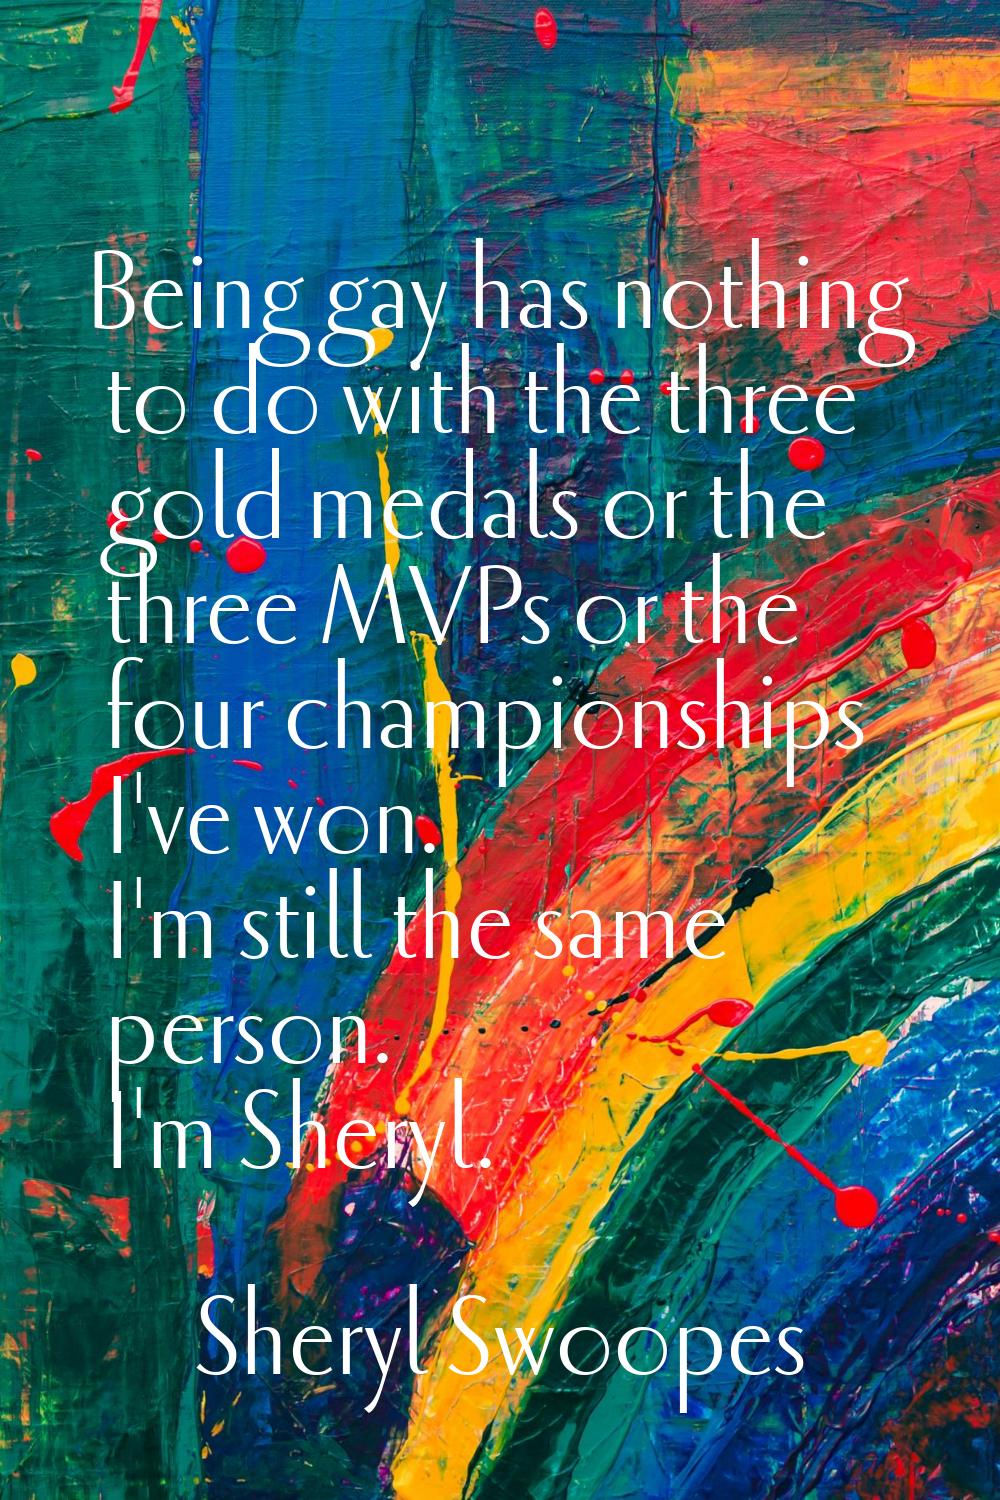 Being gay has nothing to do with the three gold medals or the three MVPs or the four championships 